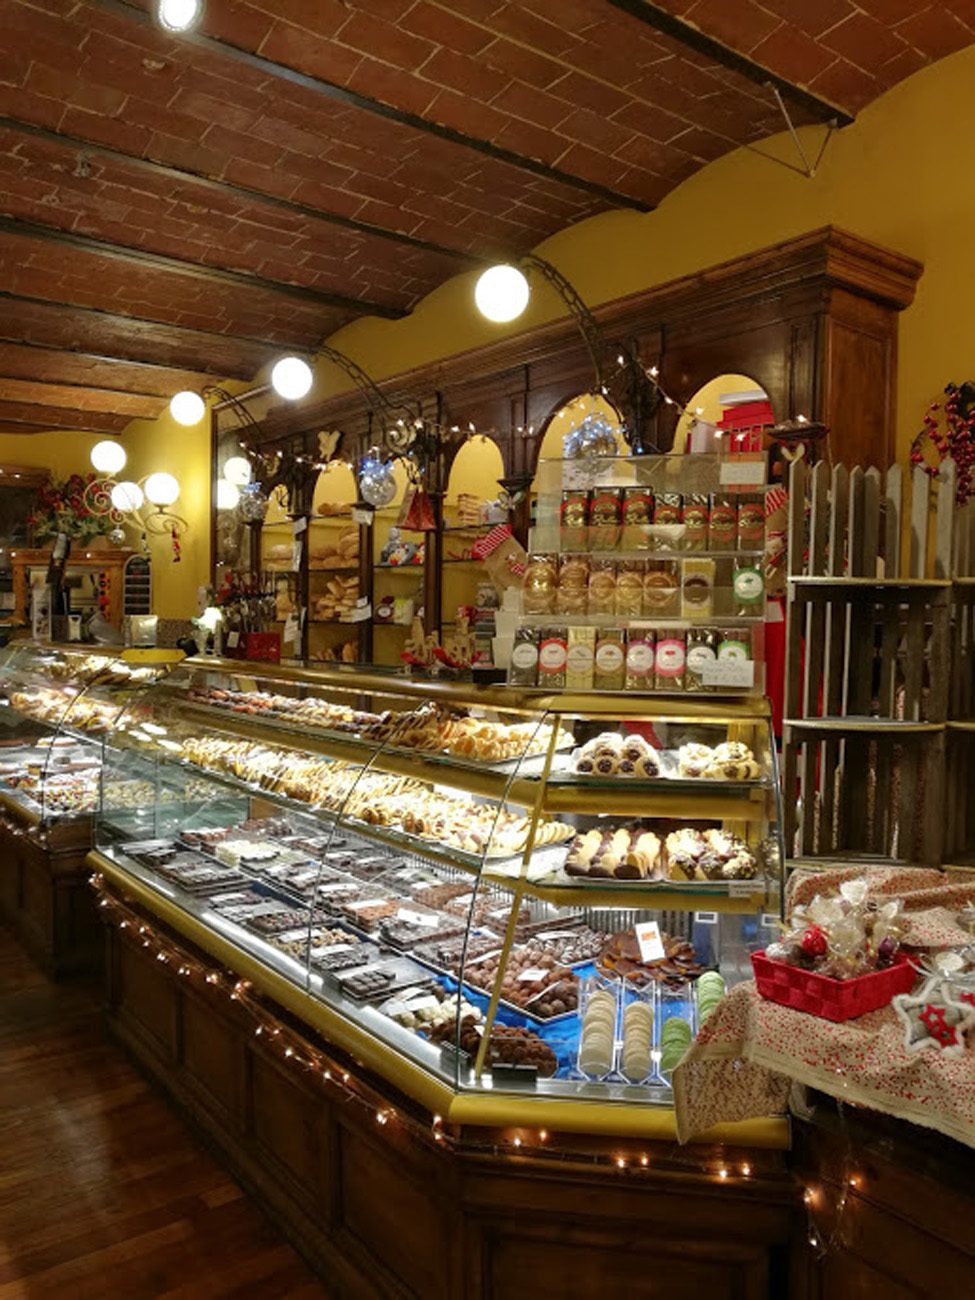 Shop in Florence